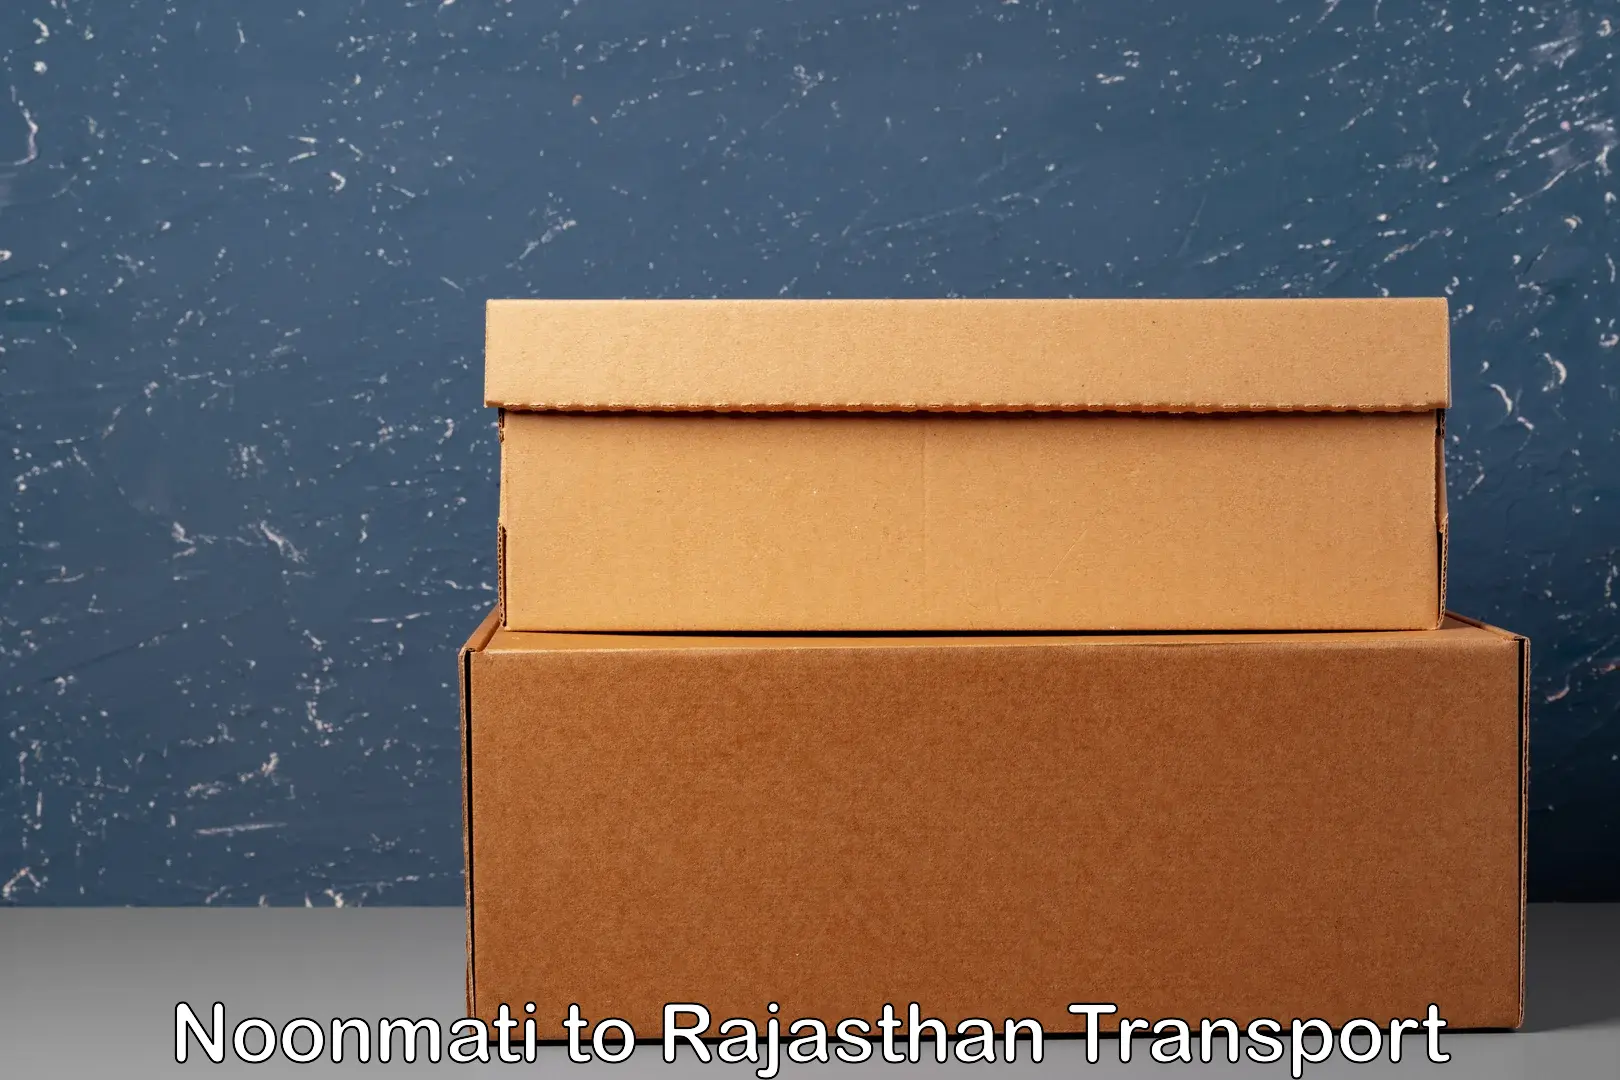 Truck transport companies in India Noonmati to Shrimadhopur